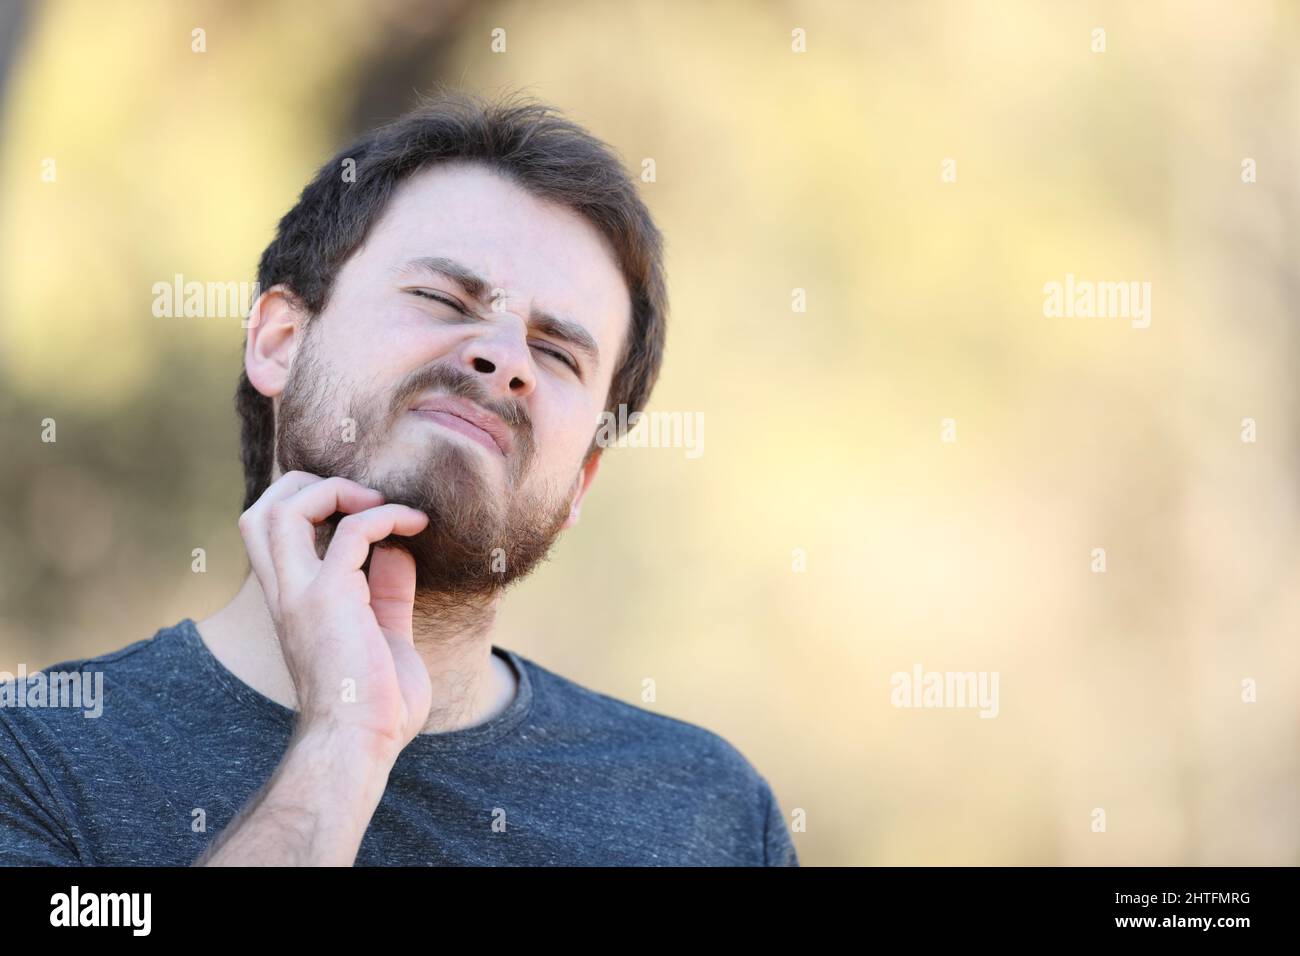 Overwhelmed man scratching itchy beard outdoors Stock Photo